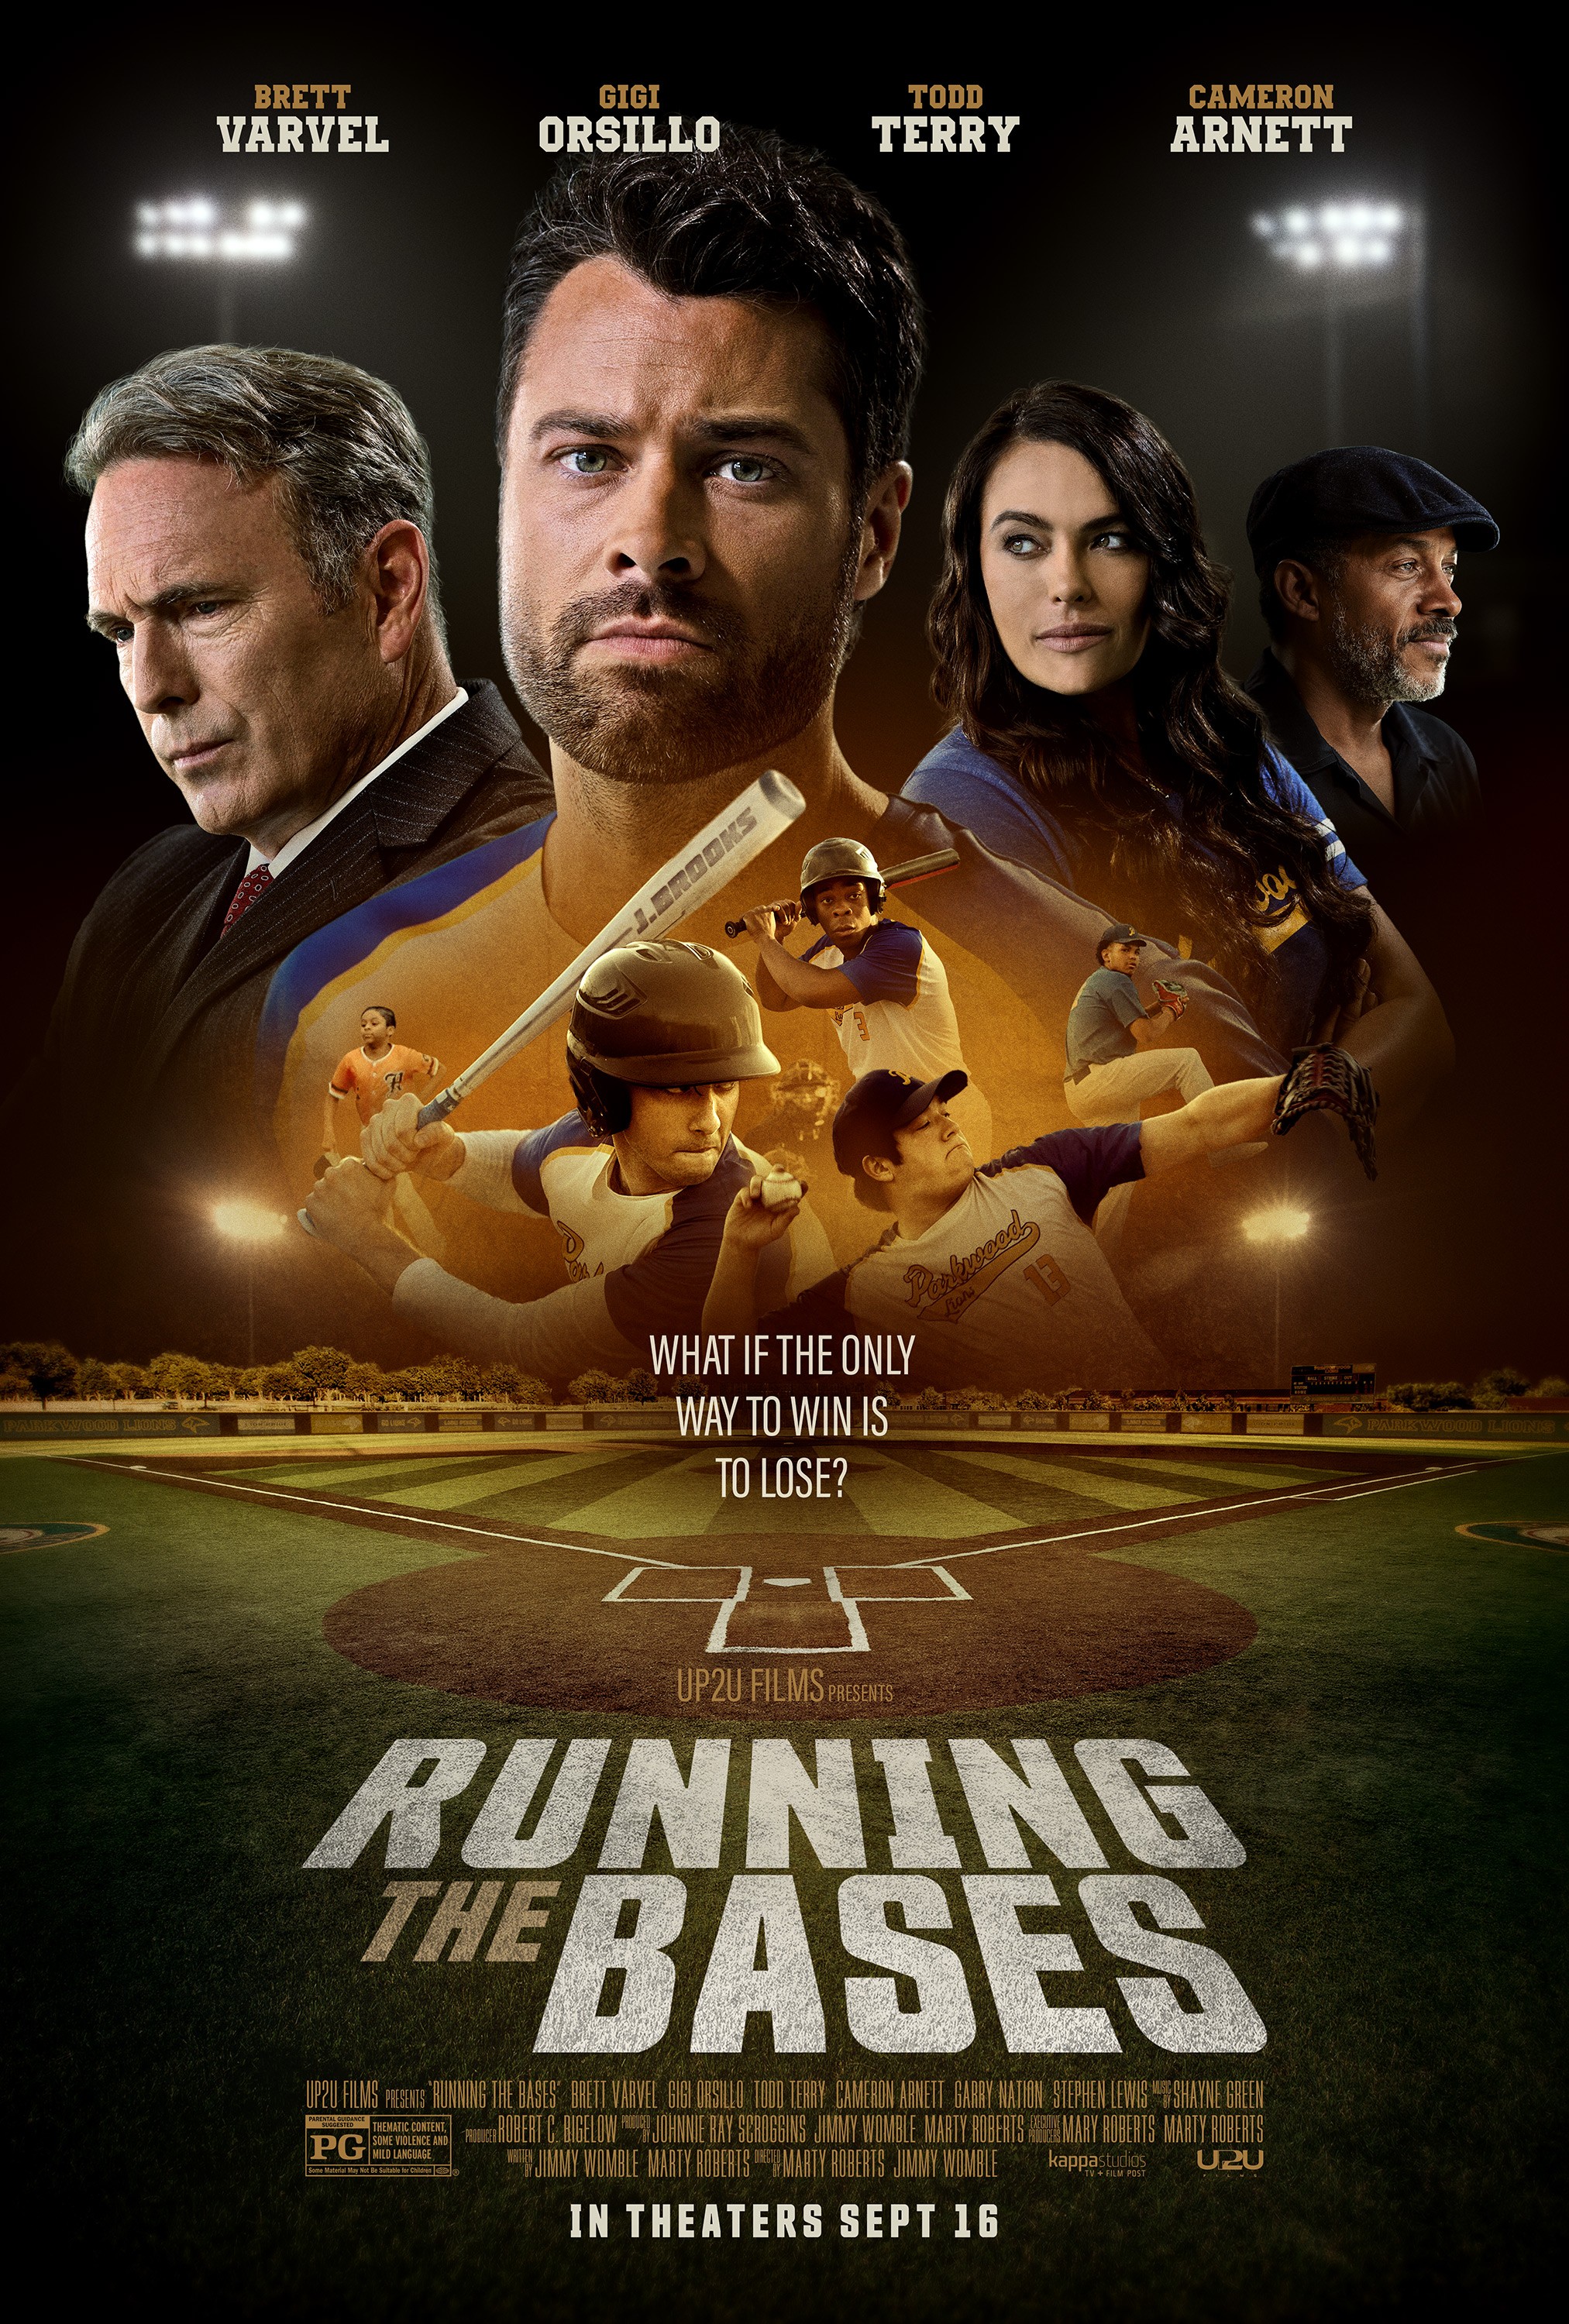 Running.the.Bases.2022.Telugu [Unofficial] 1080p 720p 480p WEB-DL Online Stream 1XBET